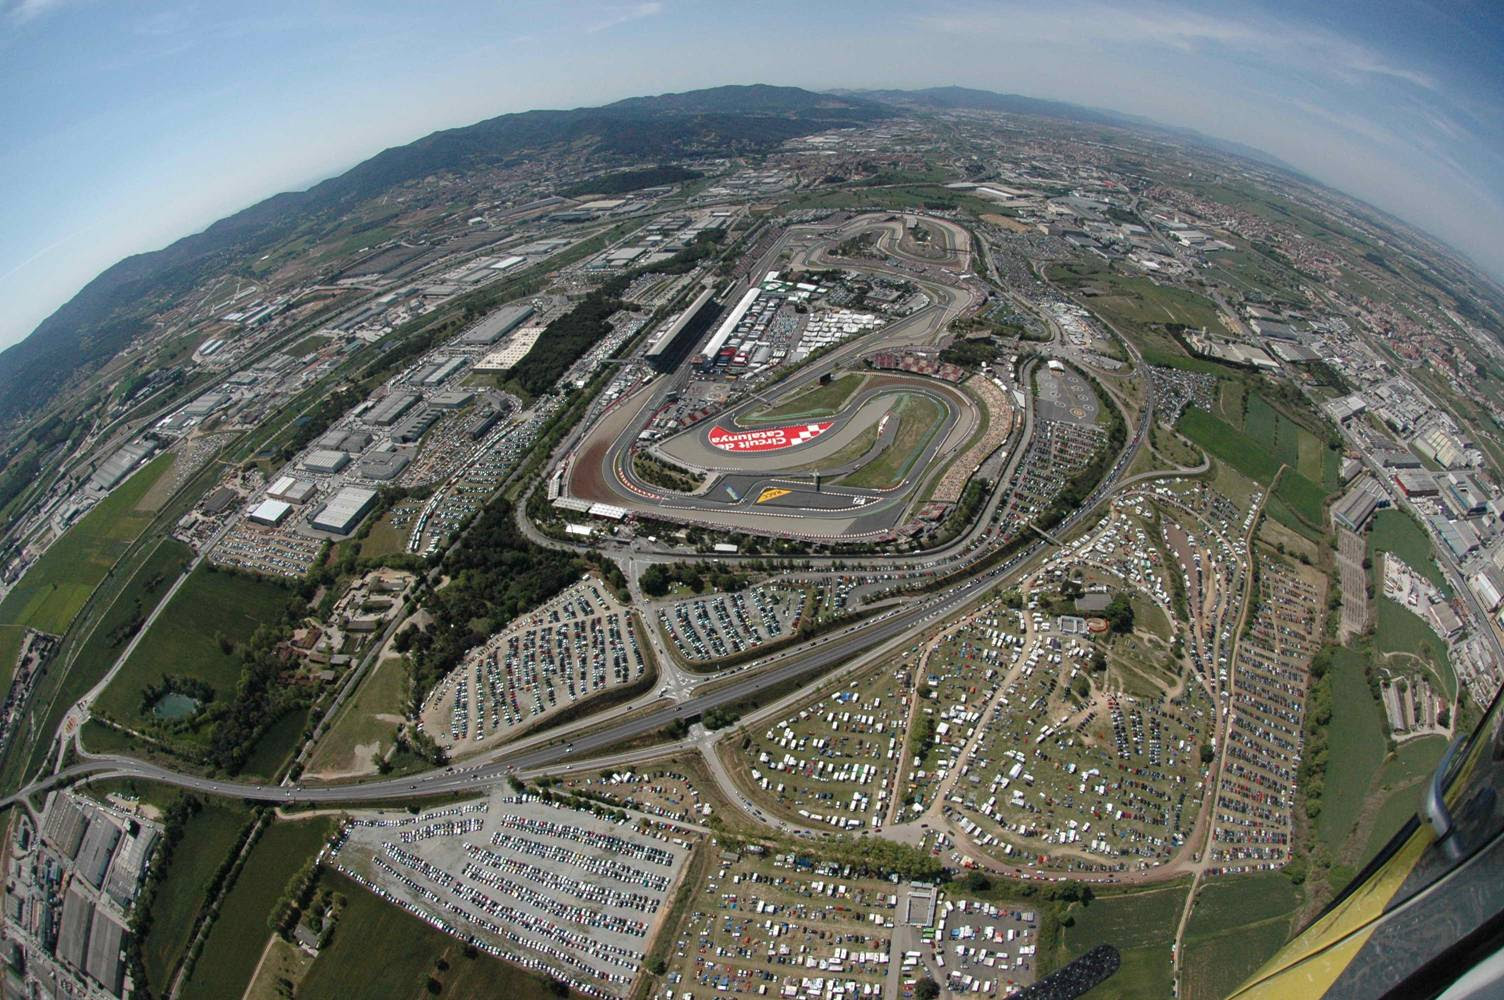 An aerial image of the Montmeló race track